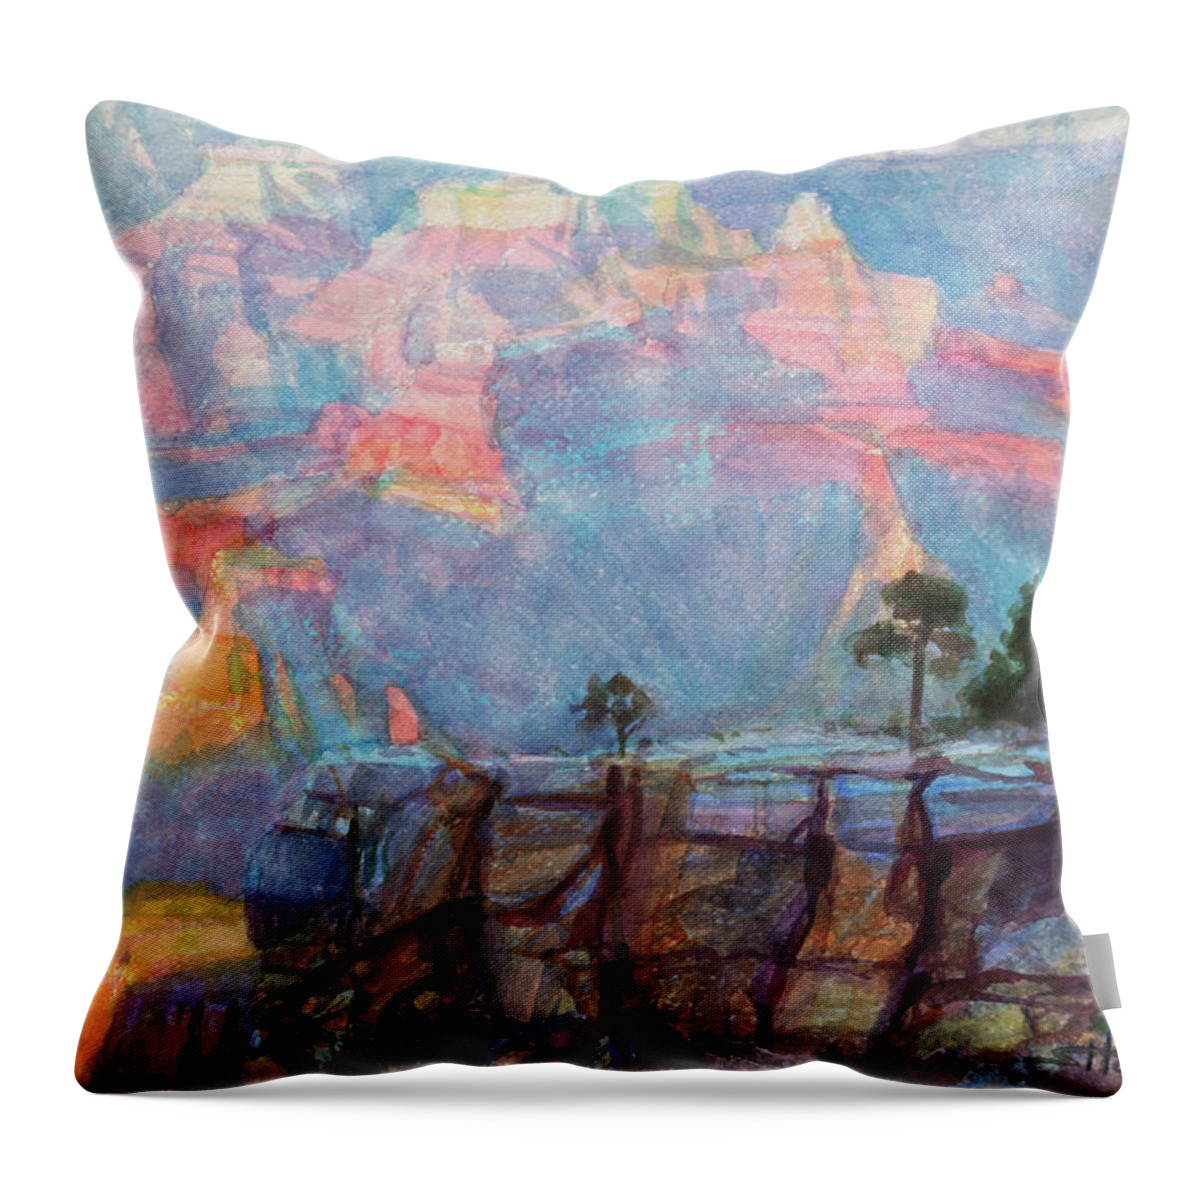 Southwest Throw Pillow featuring the painting Blue Depths by Steve Henderson